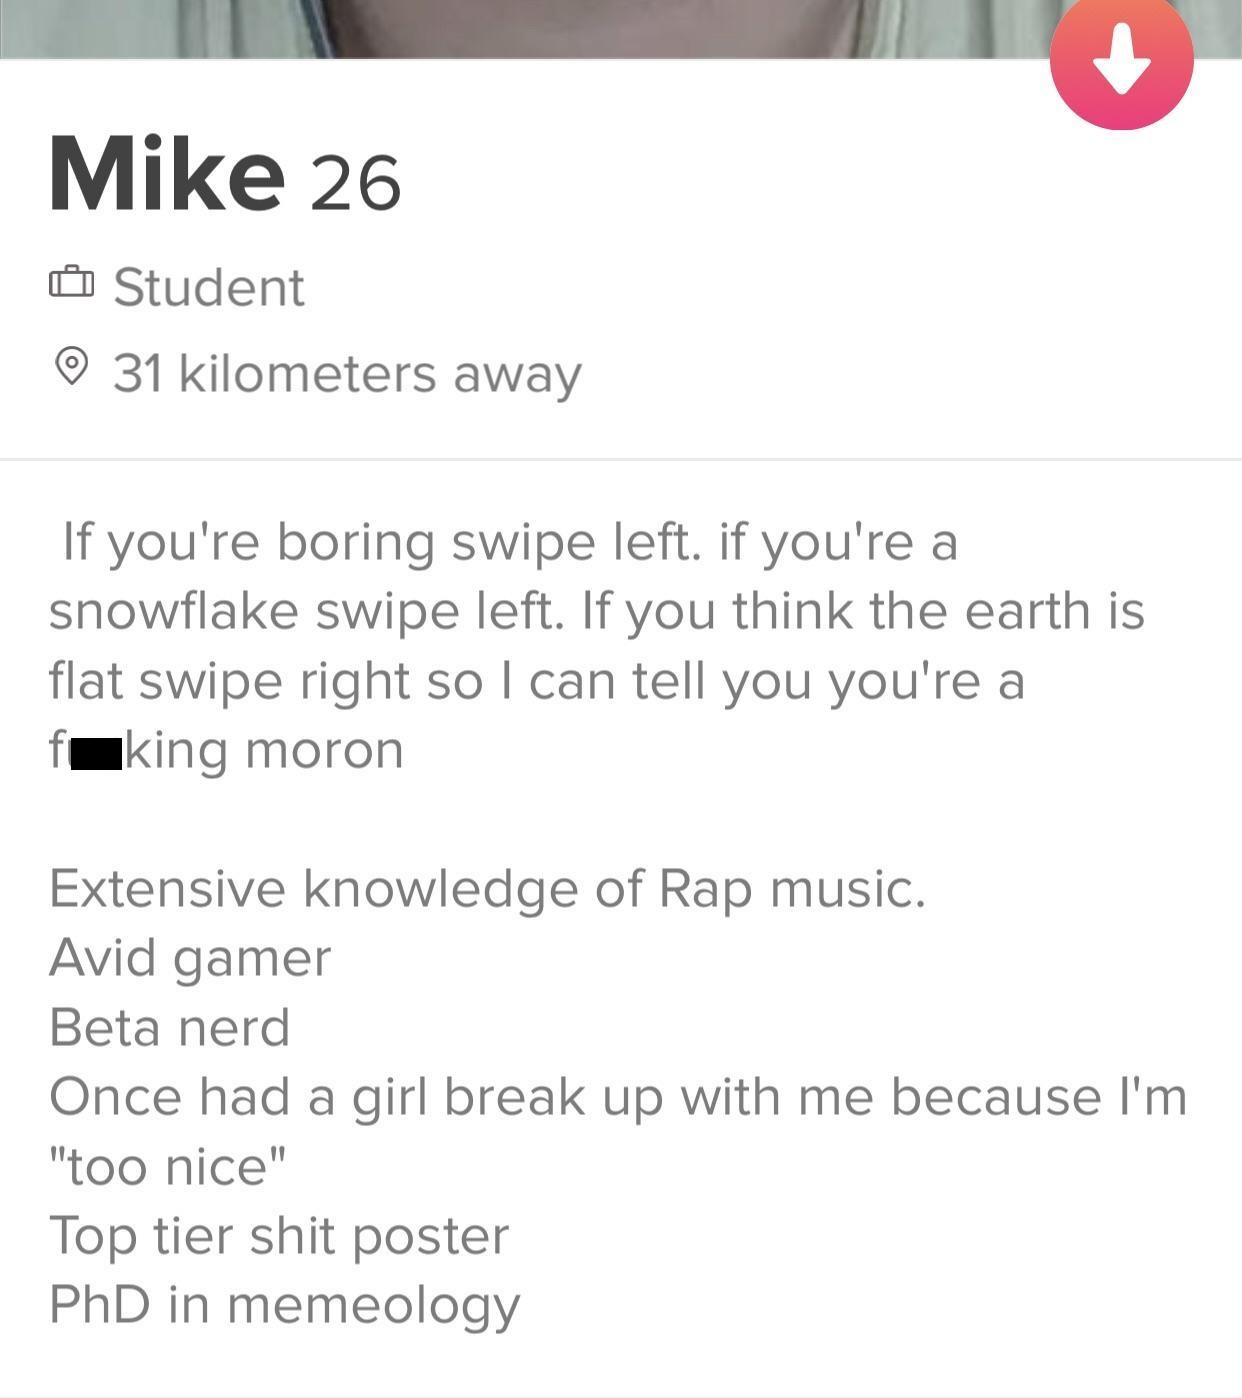 document - Mike 26 O Student 0 31 kilometers away If you're boring swipe left. if you're a snowflake swipe left. If you think the earth is flat swipe right so I can tell you you're a fuking moron Extensive knowledge of Rap music. Avid gamer Beta nerd Once